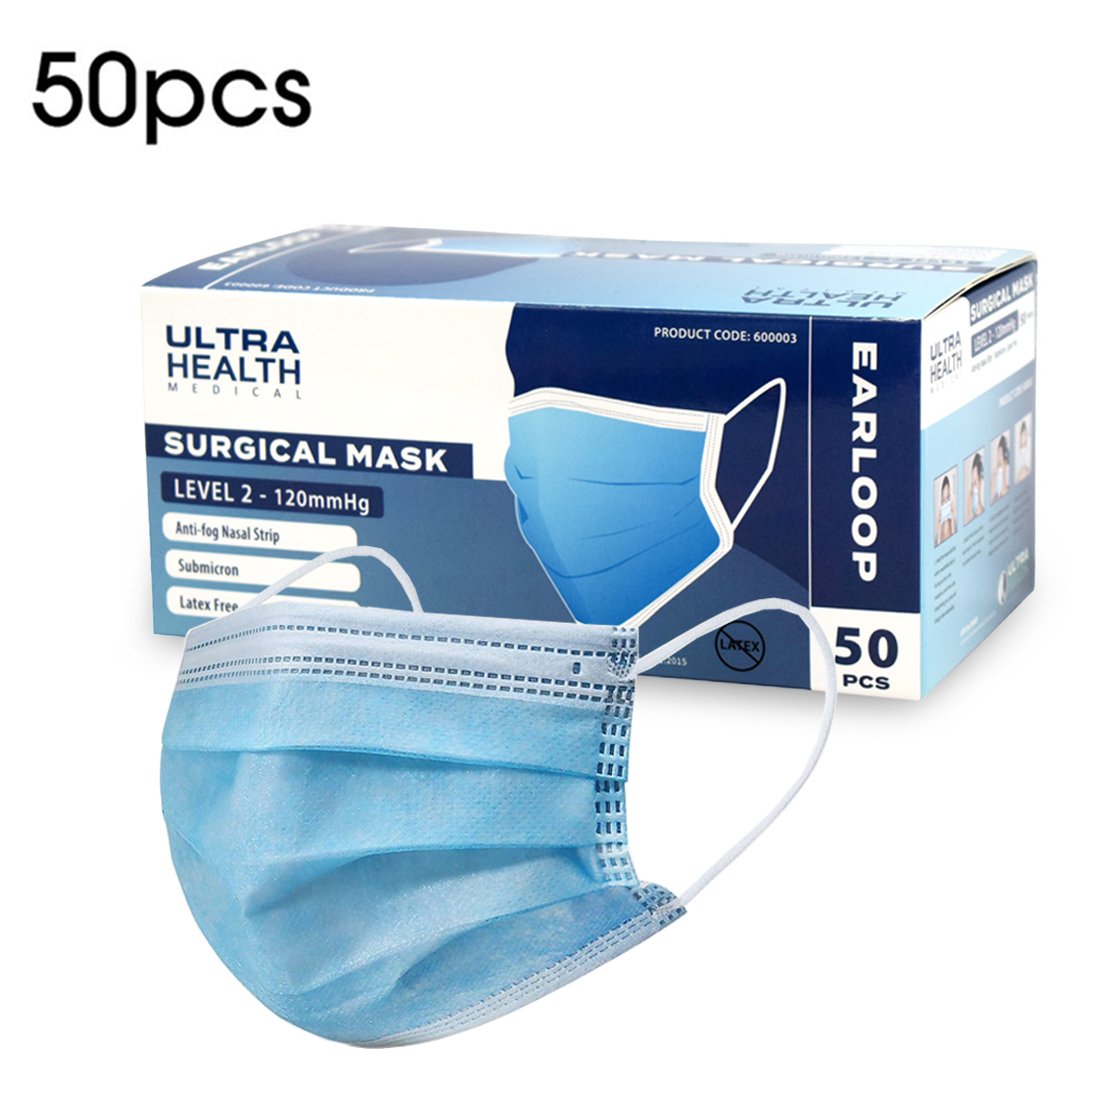 Ultra Health Medical Surgical Mask Ear Loops Blue Box of 50